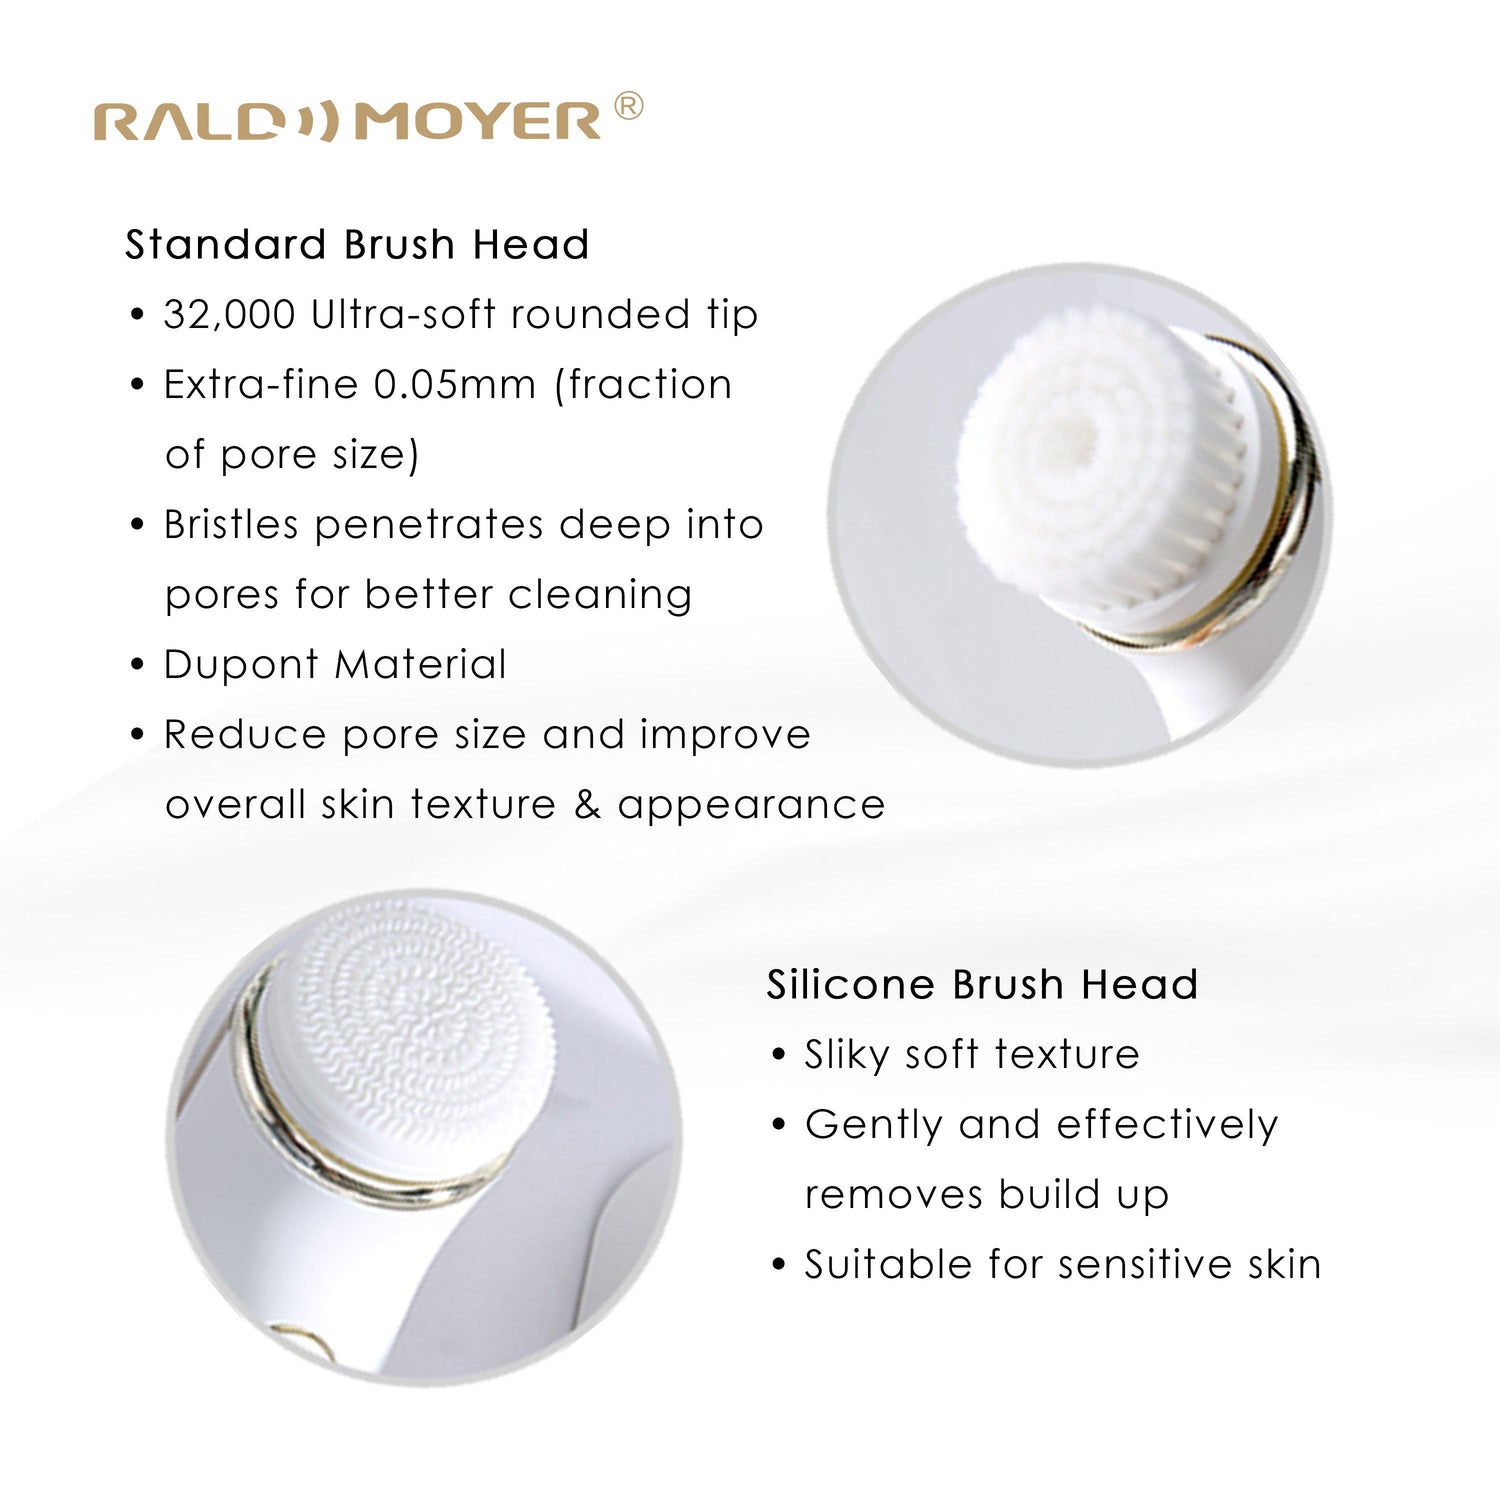 Raldmoyer Self - Drying Facial Cleansing Device (LD 8668) - Bloom Concept